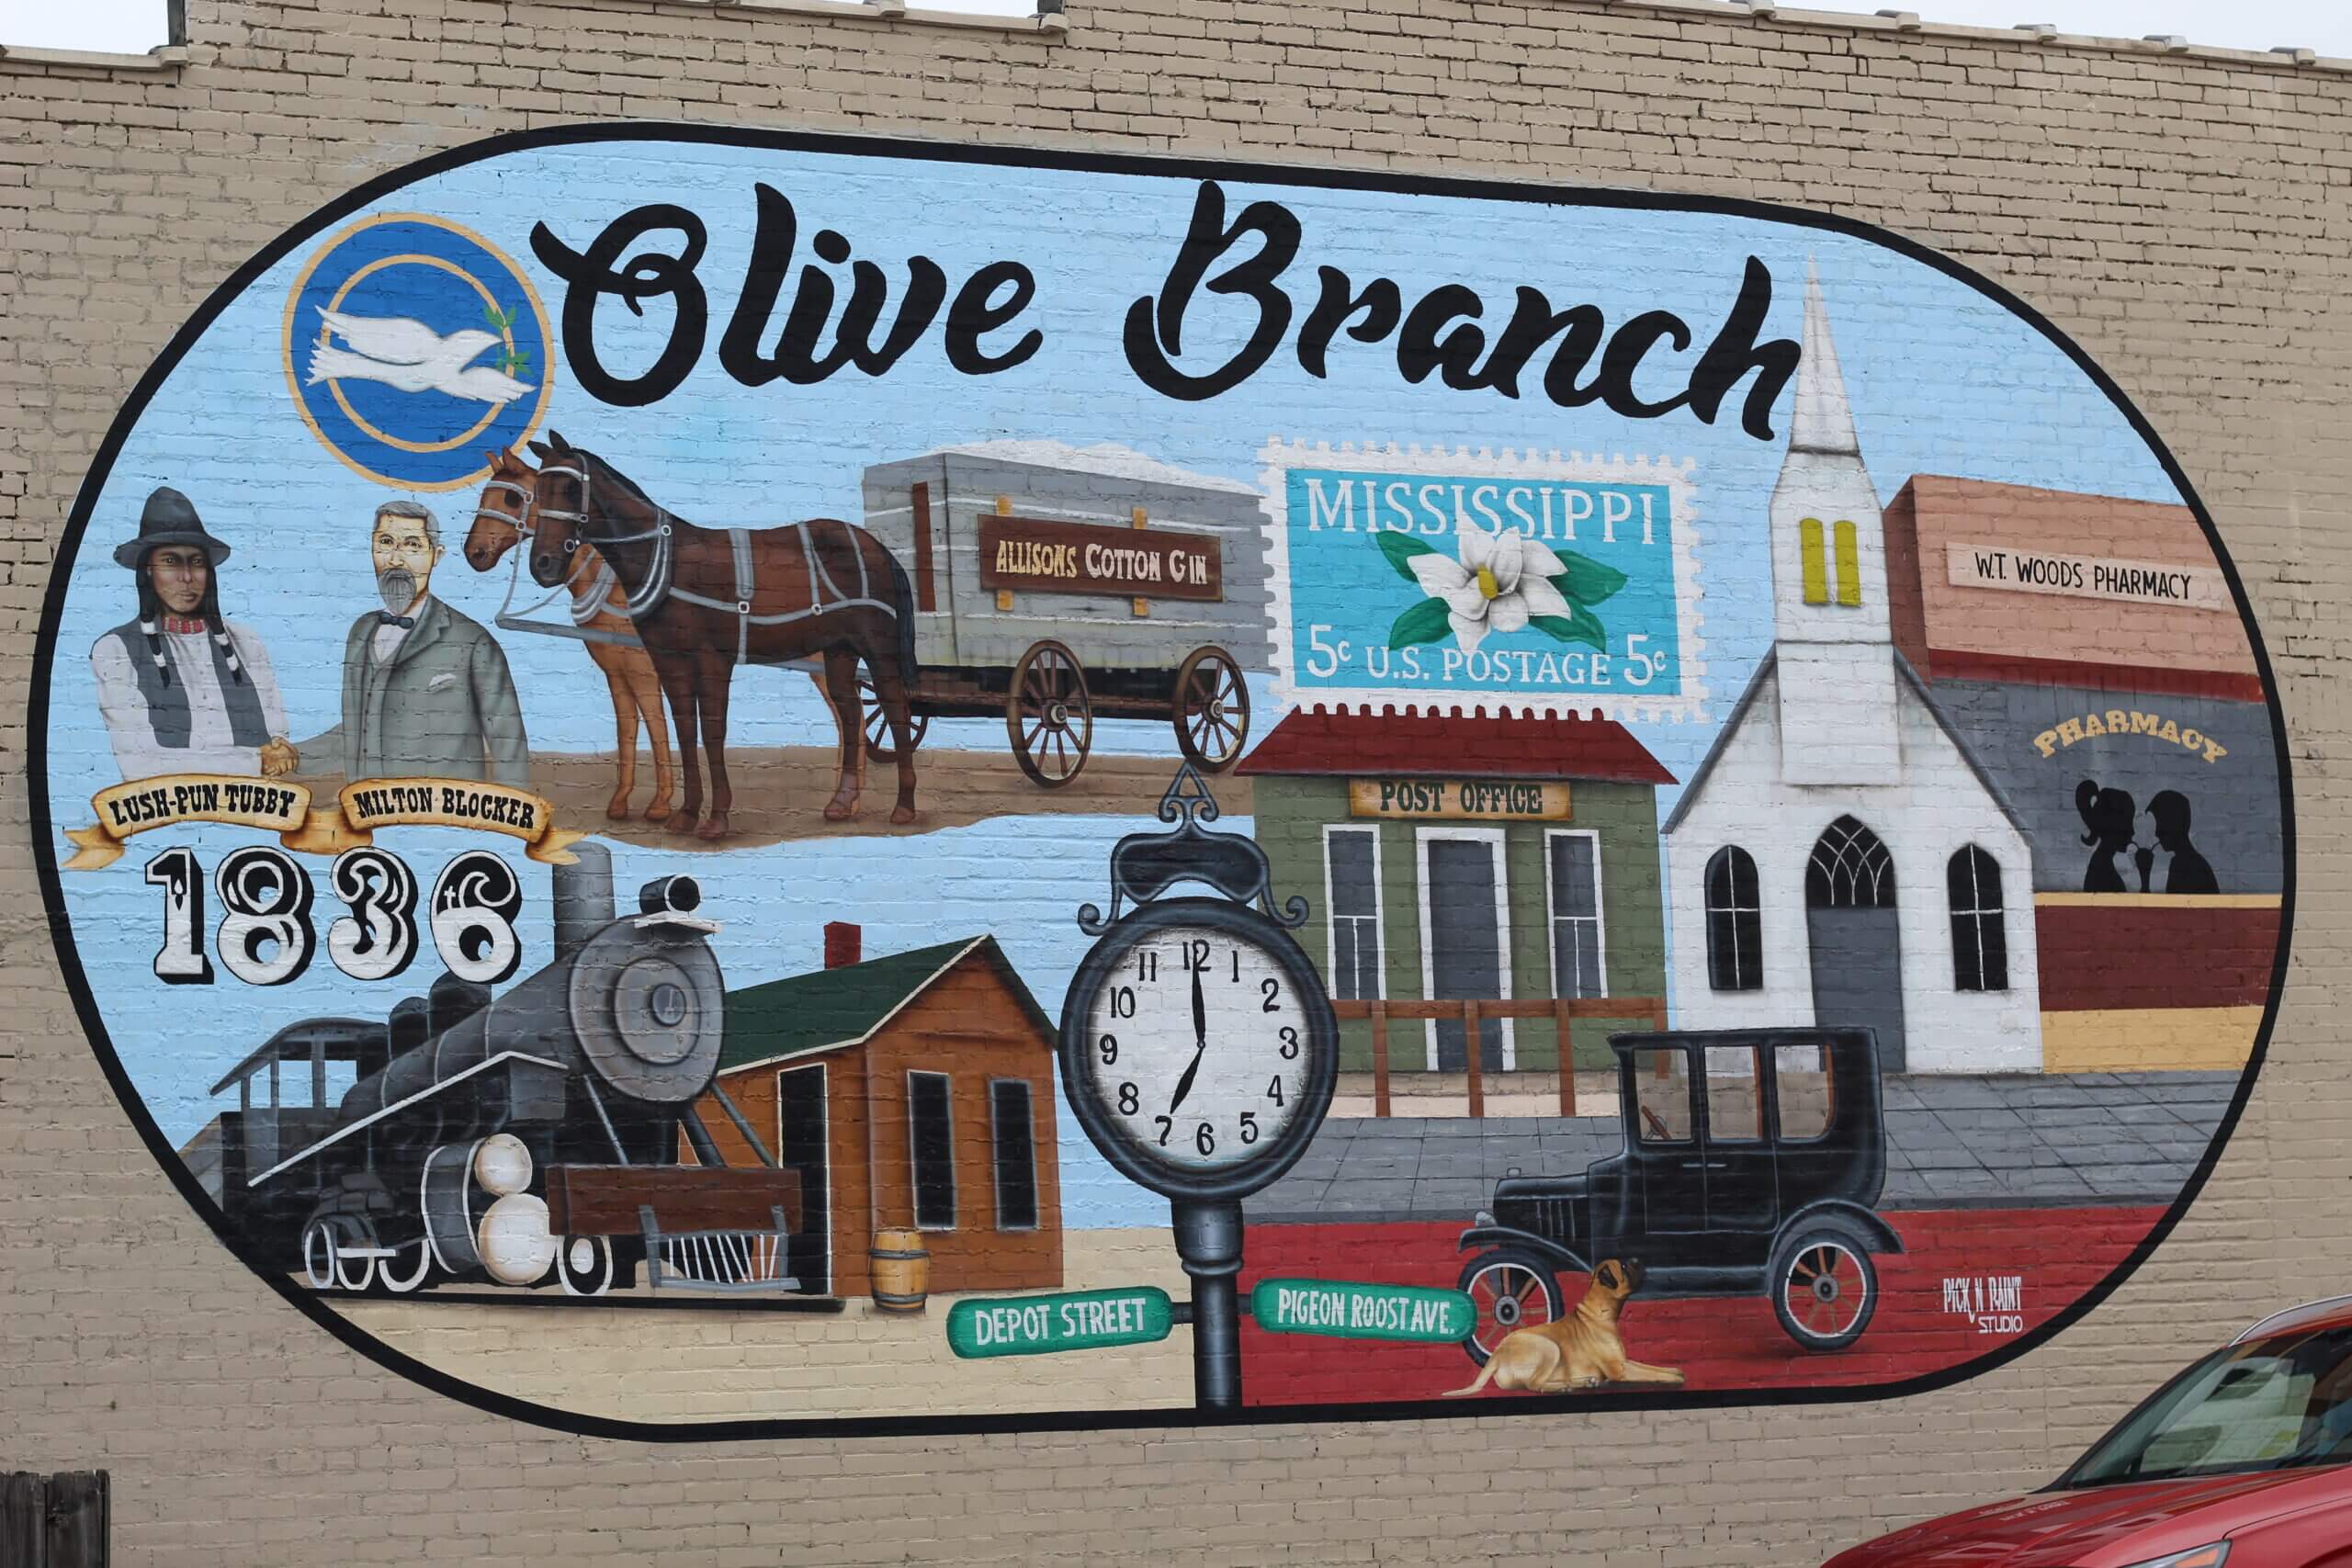 Olive Branch street to close for construction work